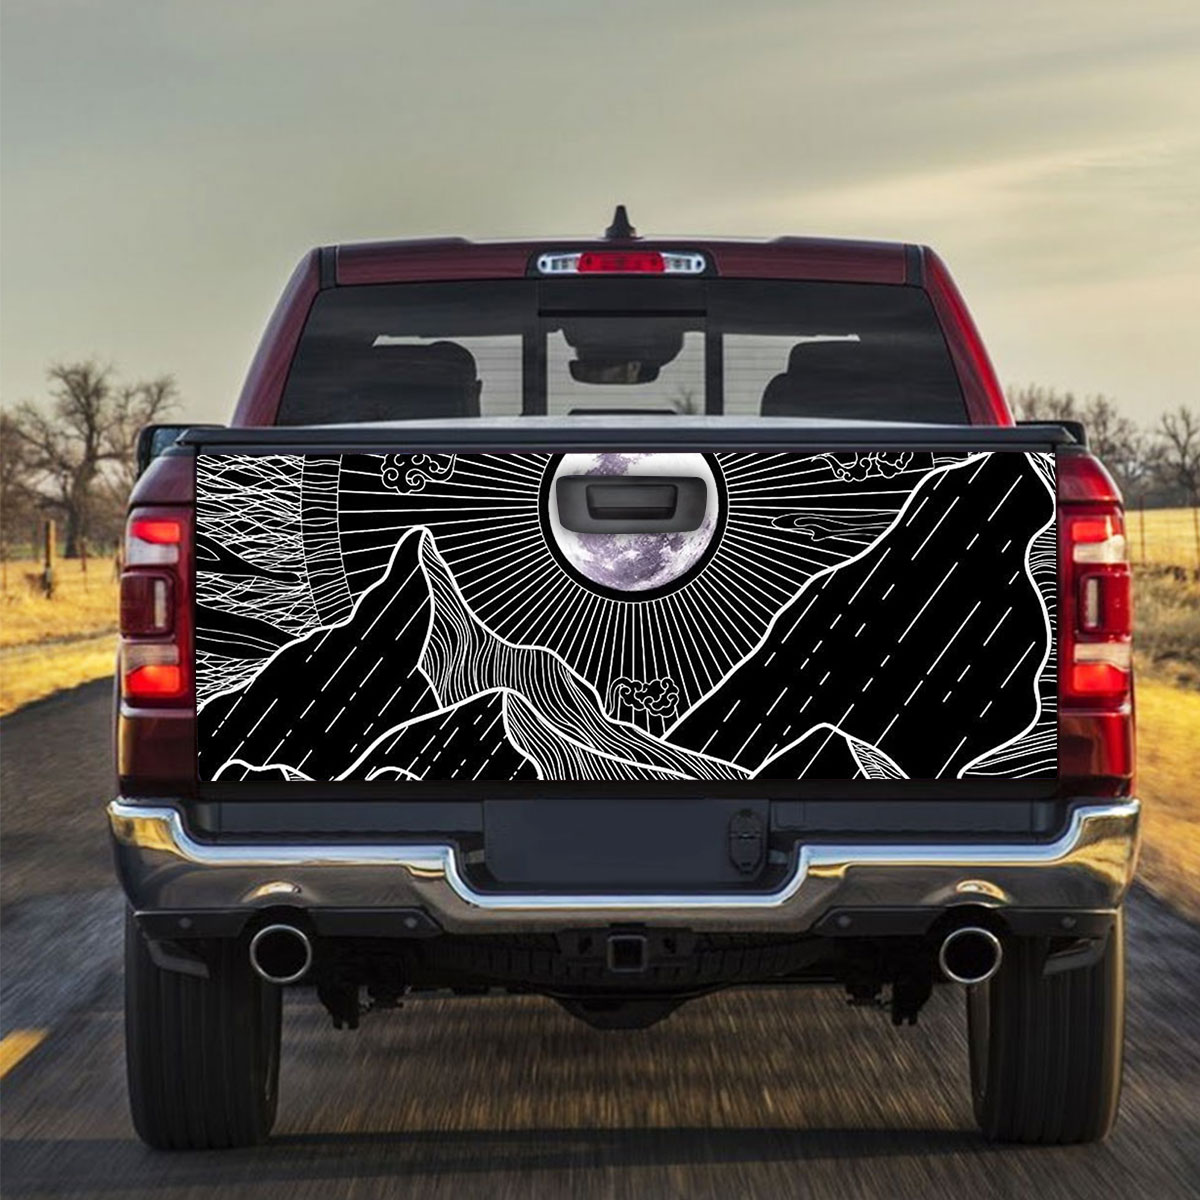 Moon Mountain Truck Bed Decal_2_1